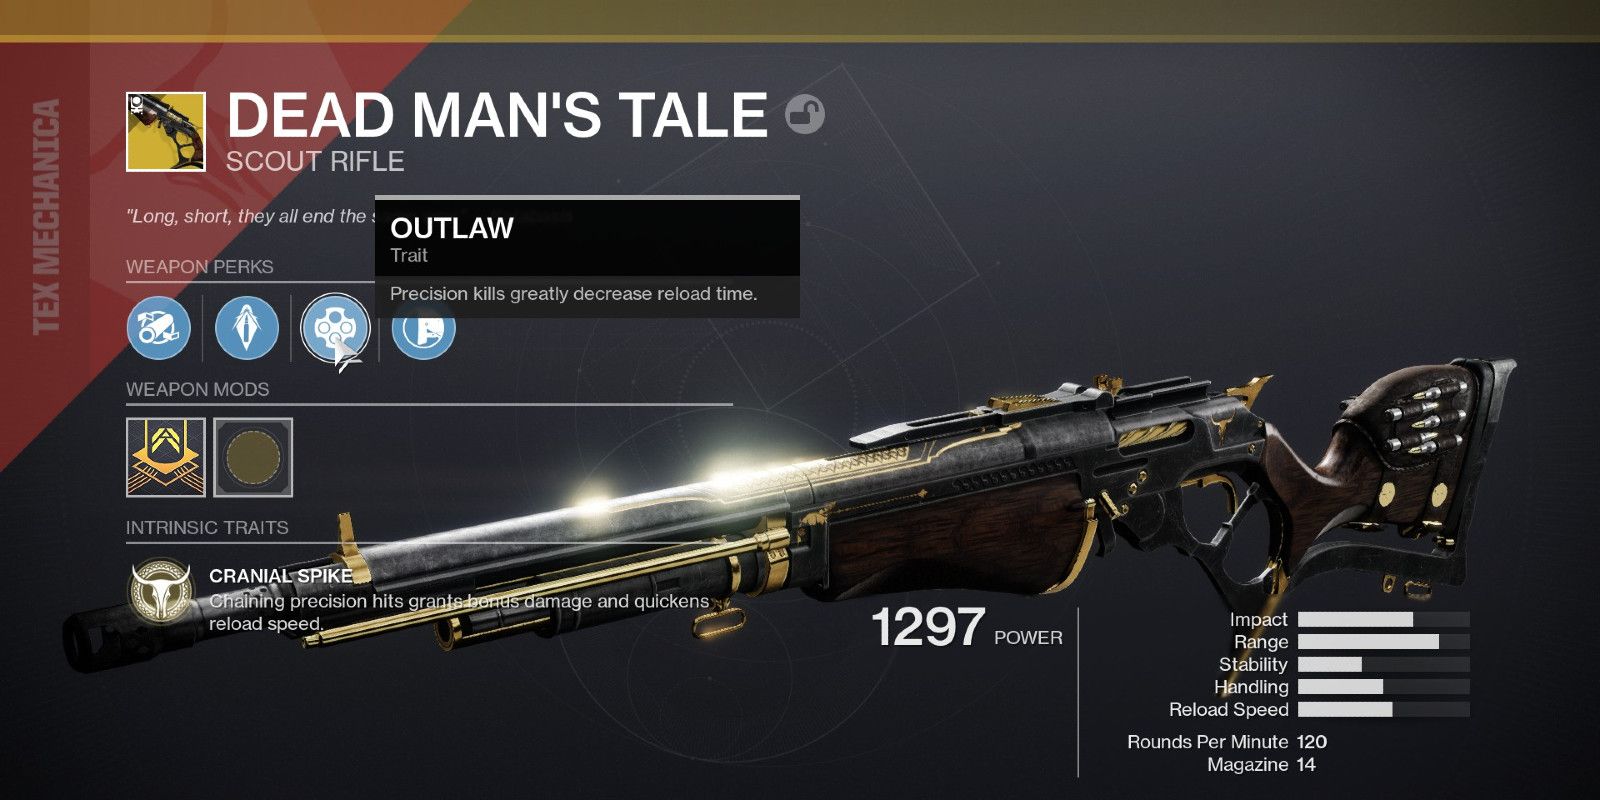 destiny-2-dead-man-s-tale-god-roll-and-how-to-get-it-hot-movies-news